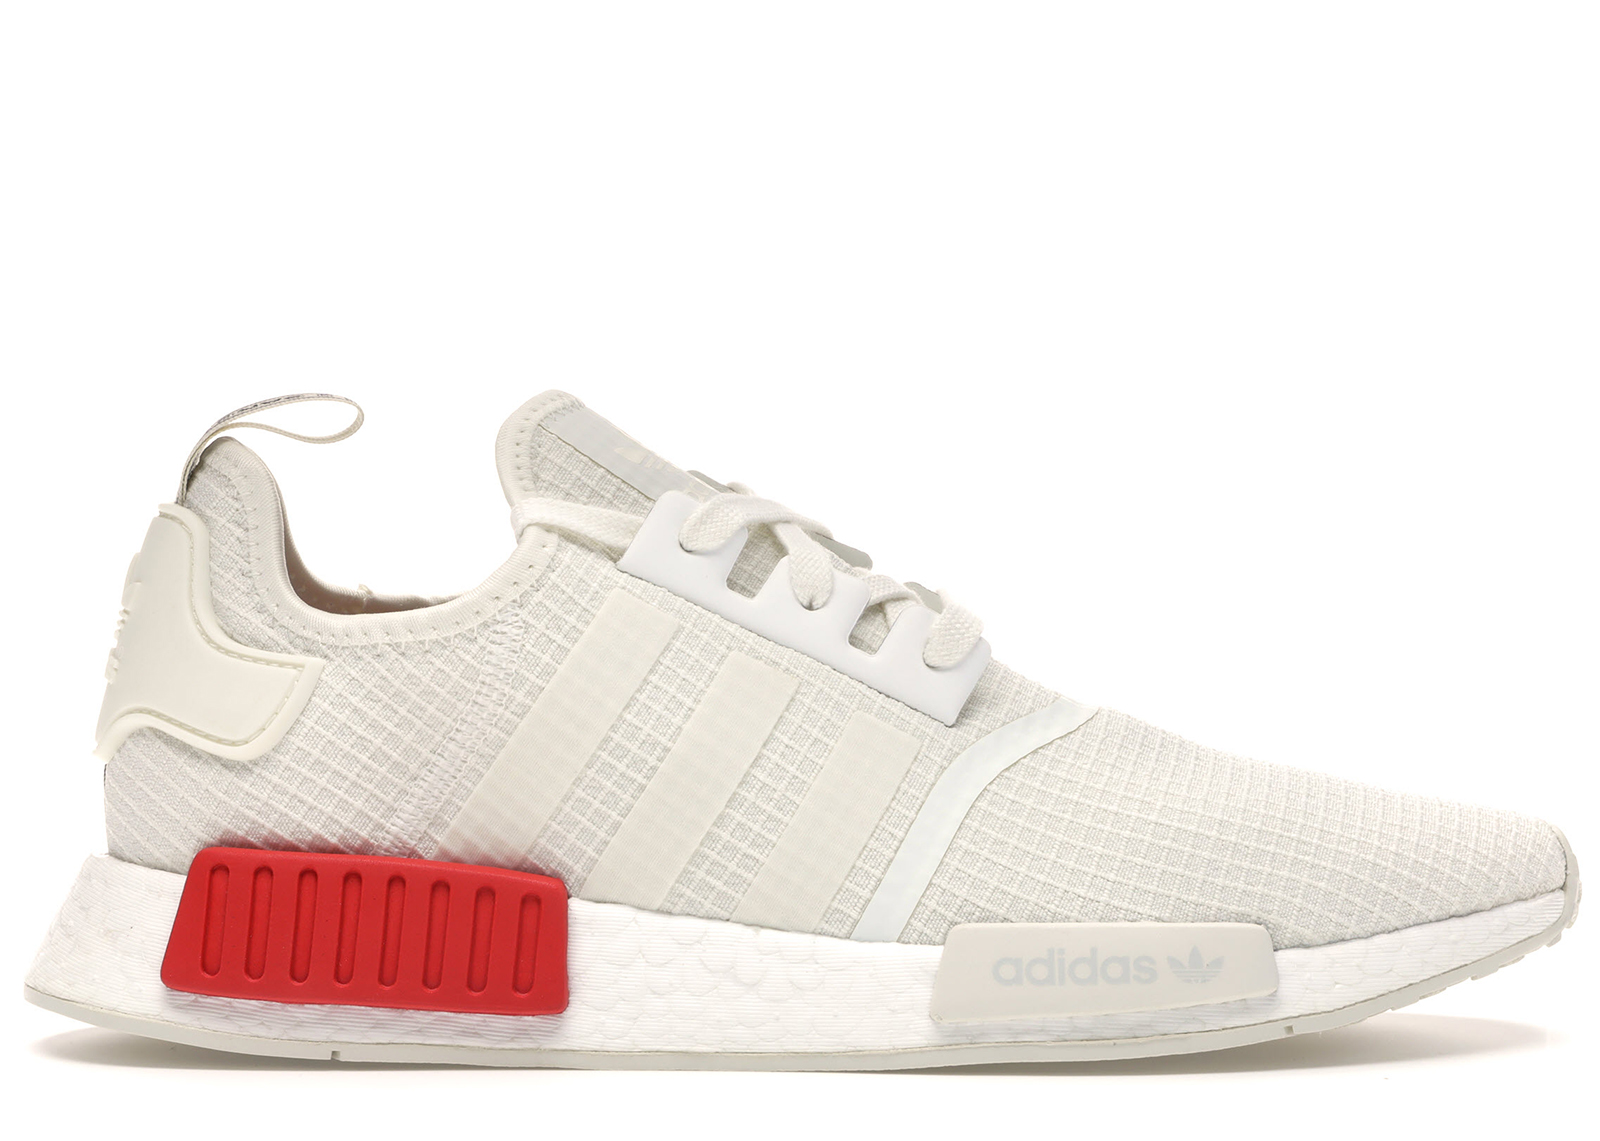 adidas NMD R1 Off White Lush Red 